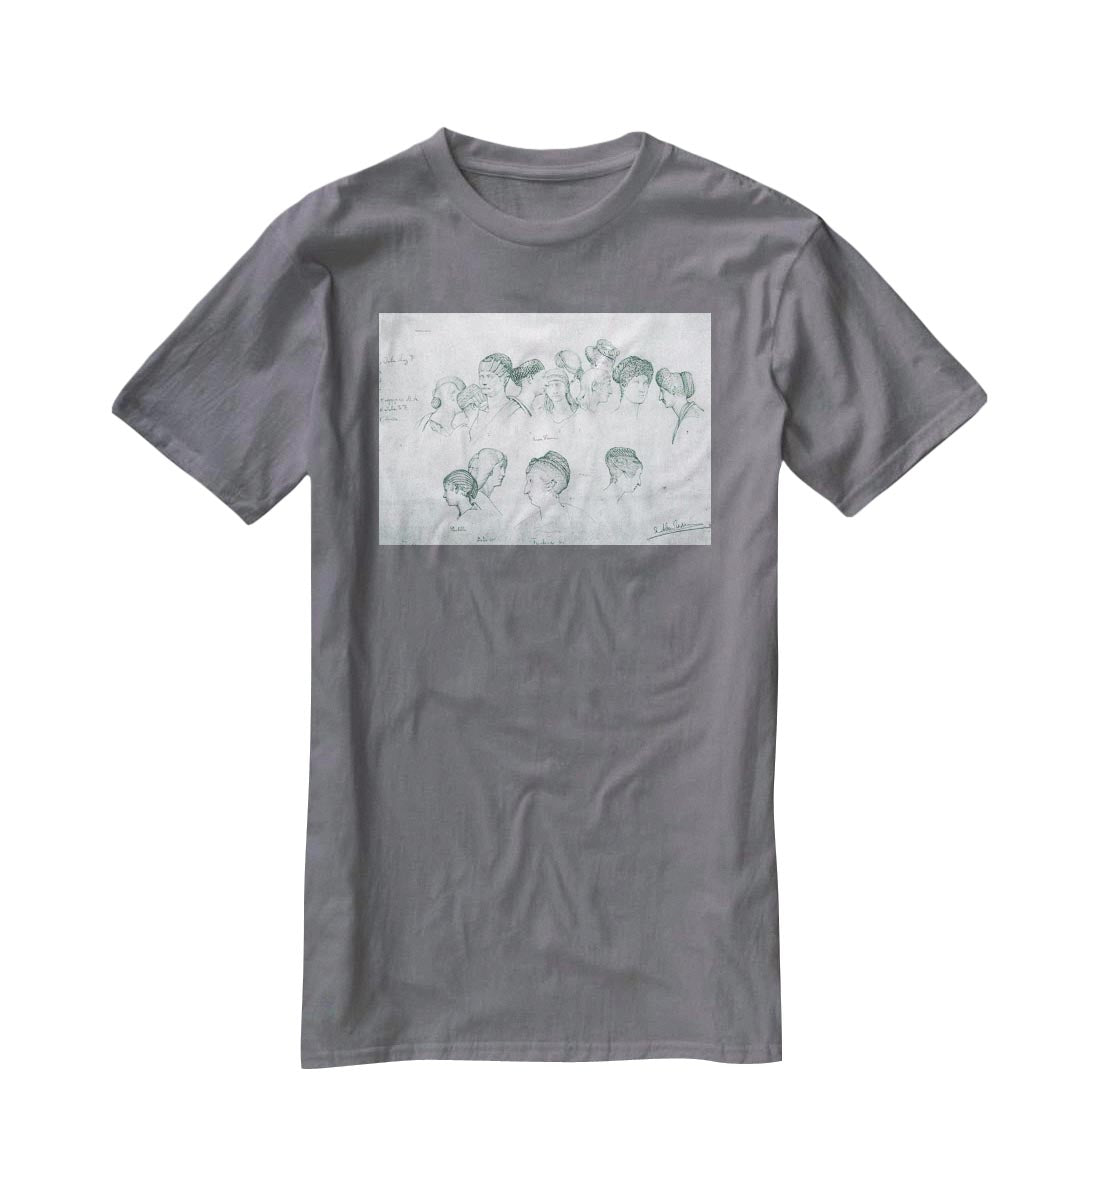 Sketch of hairstyles from ancient sculptures by Alma Tadema T-Shirt - Canvas Art Rocks - 3